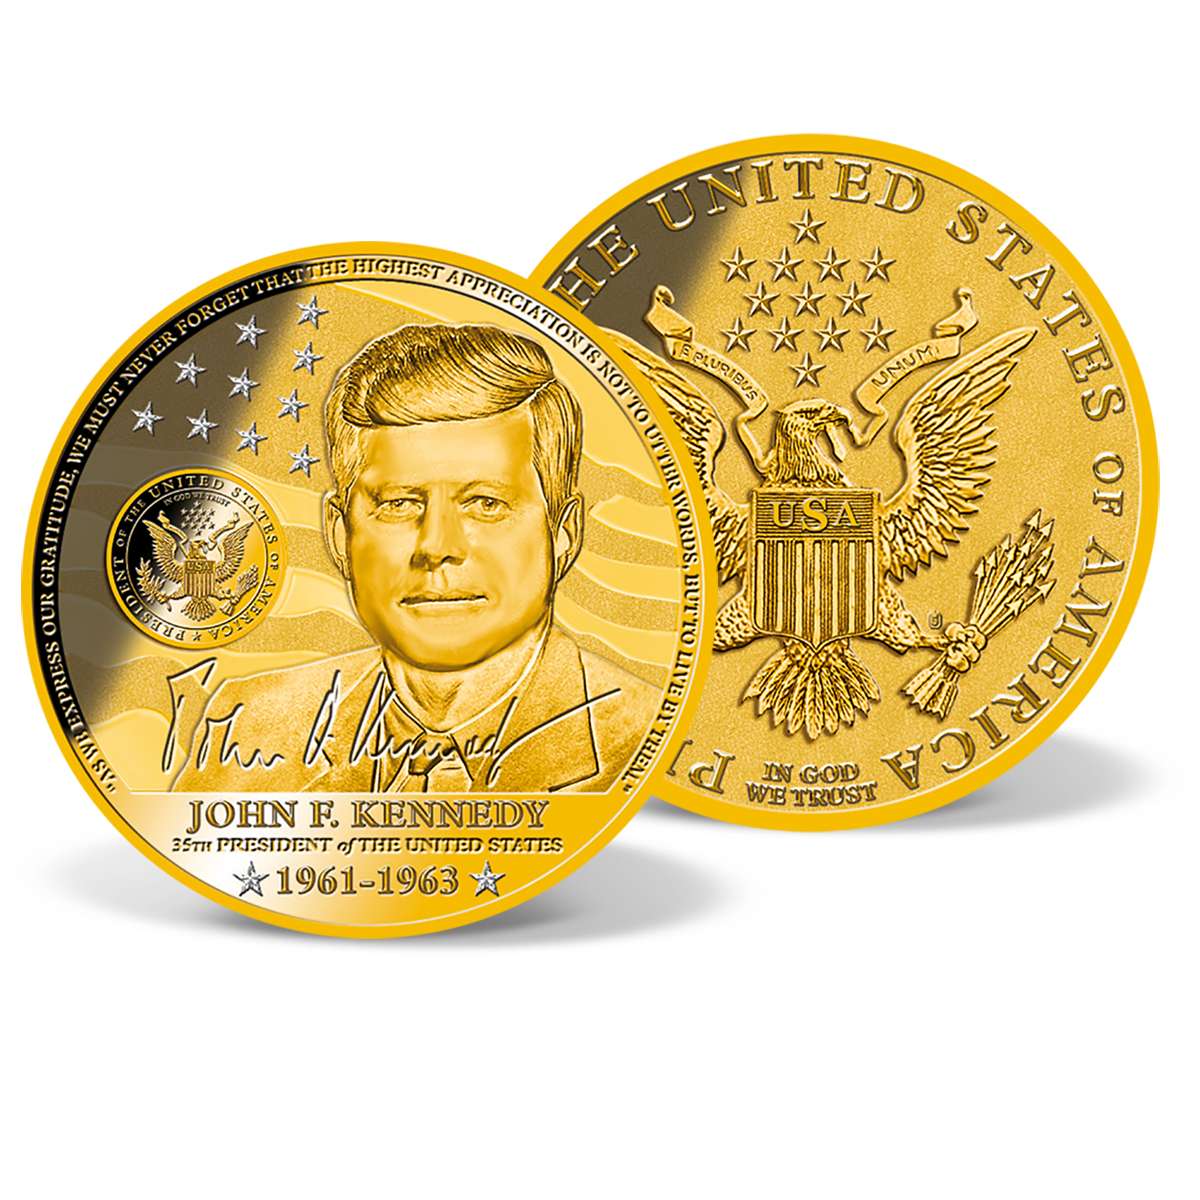 John F. Kennedy Crystal-inlaid Commemorative Coin